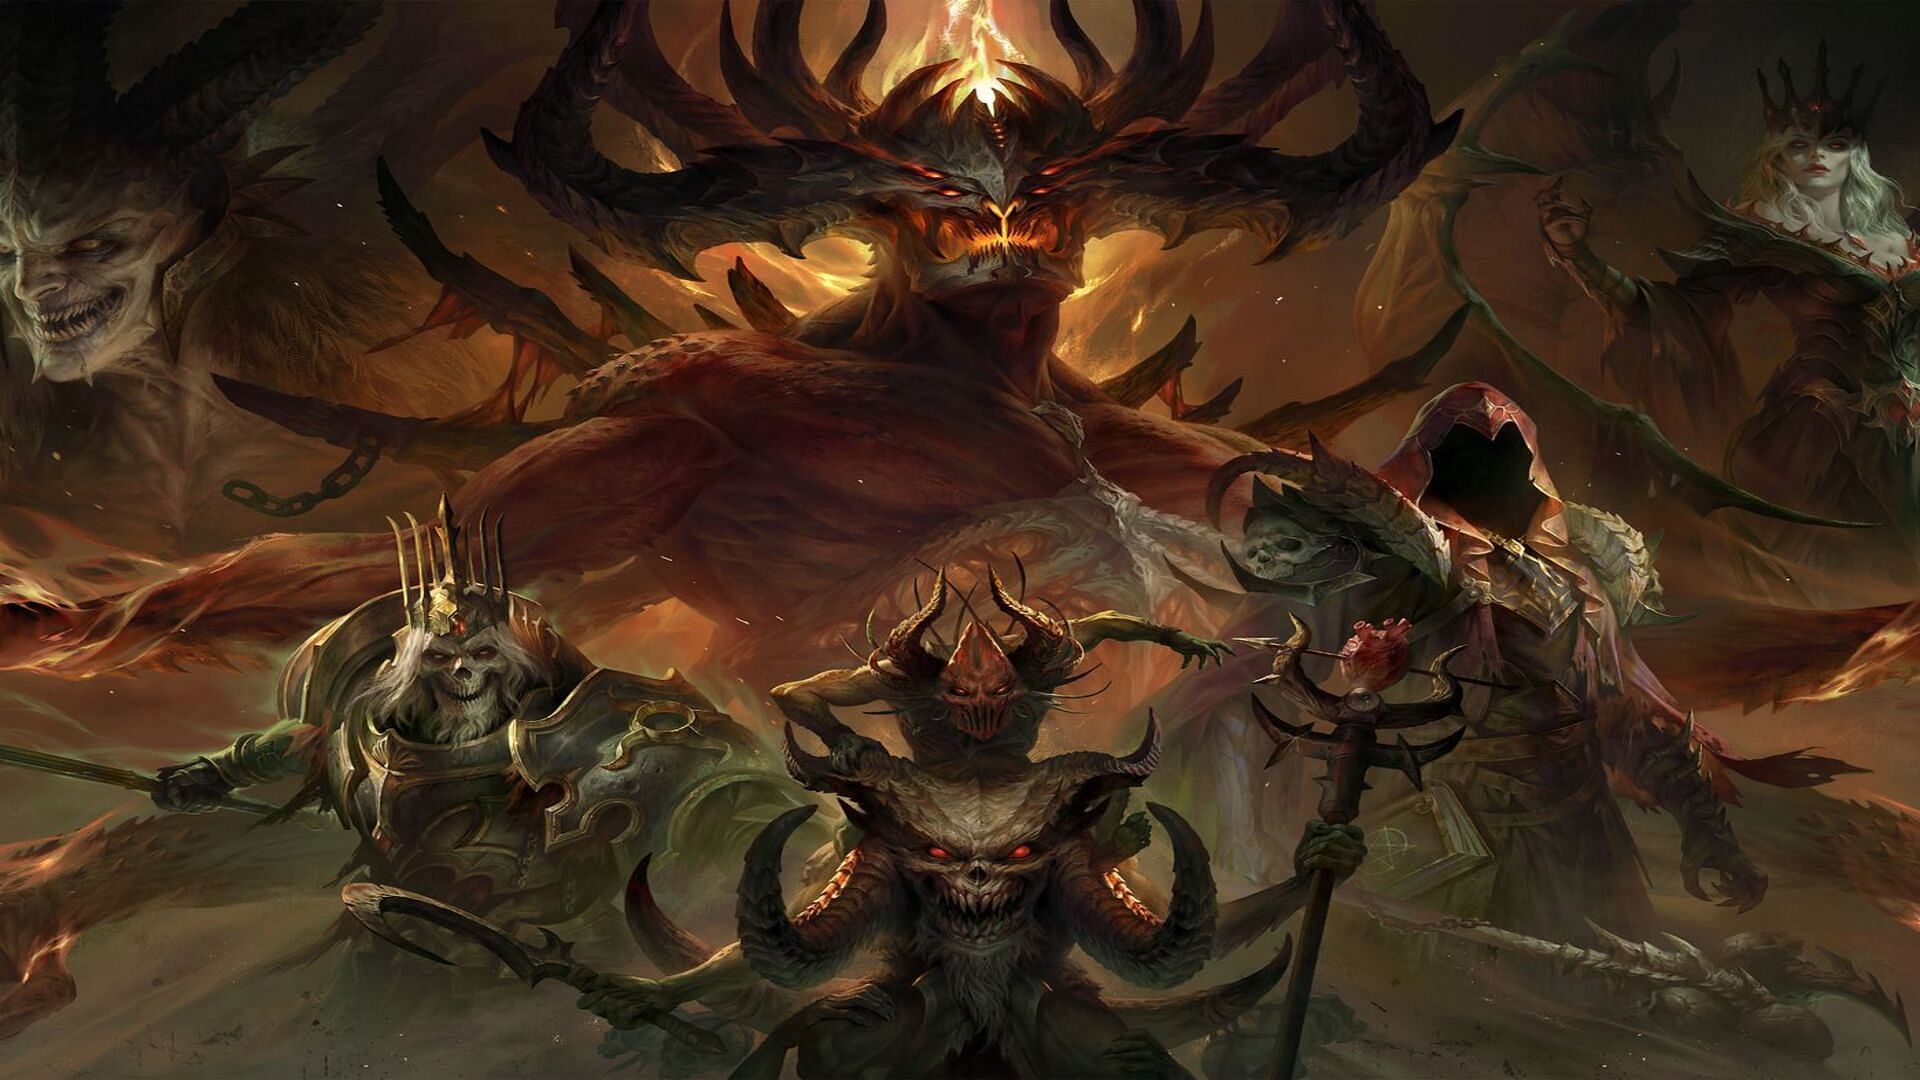 The Lords of Hell (source: Blizzard)